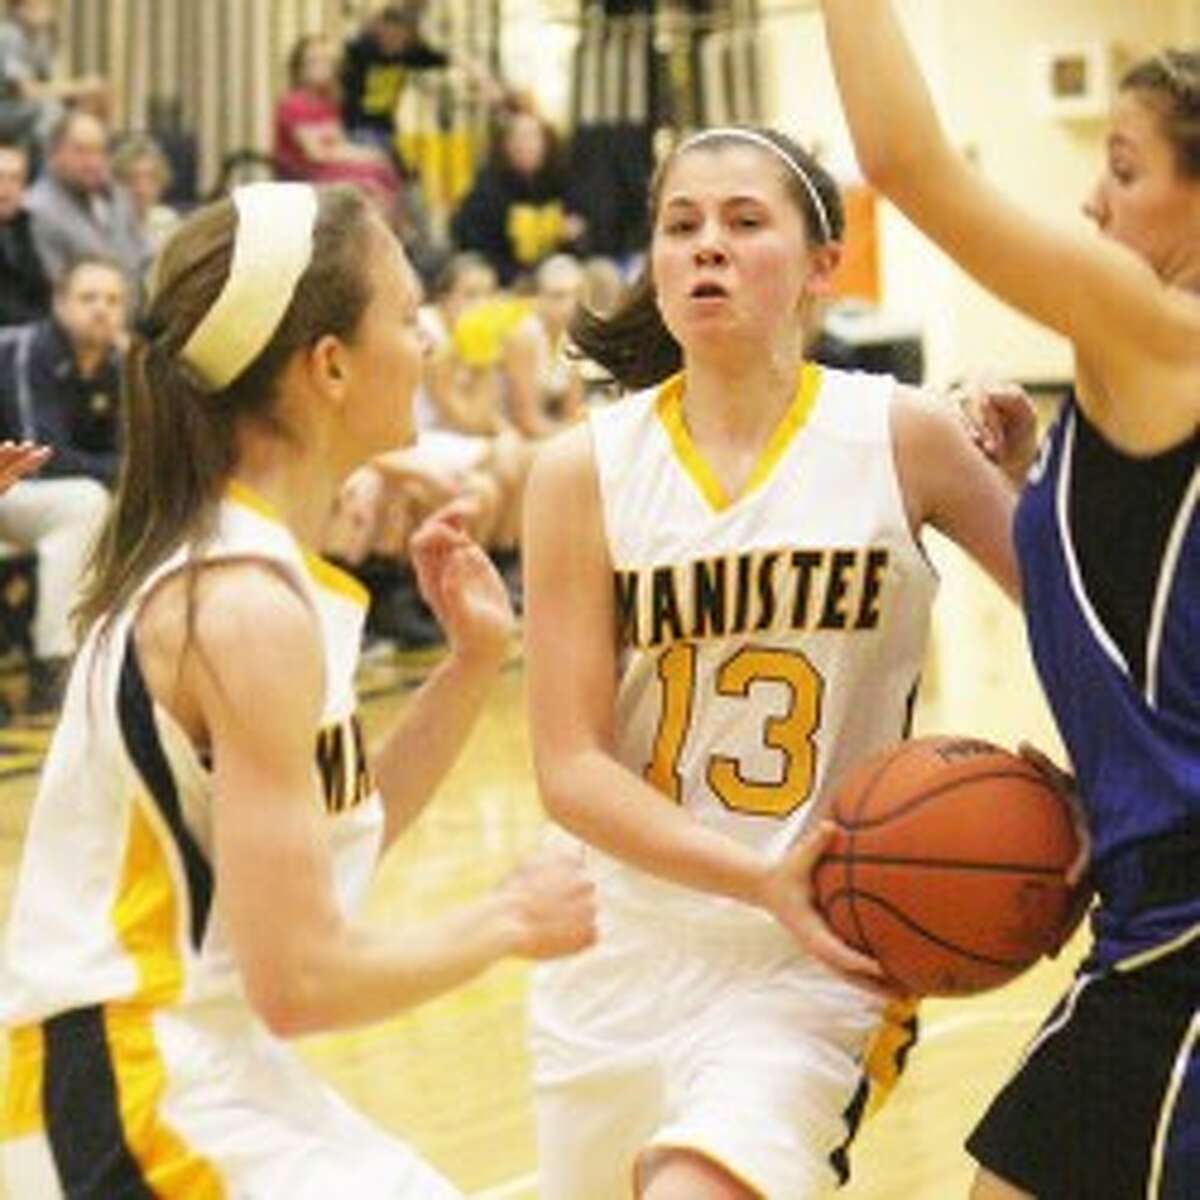 Manistee’s Emily Thompson drives to the basket during the first half of Wednesday’s game. (Dylan Savela/News Advocate)